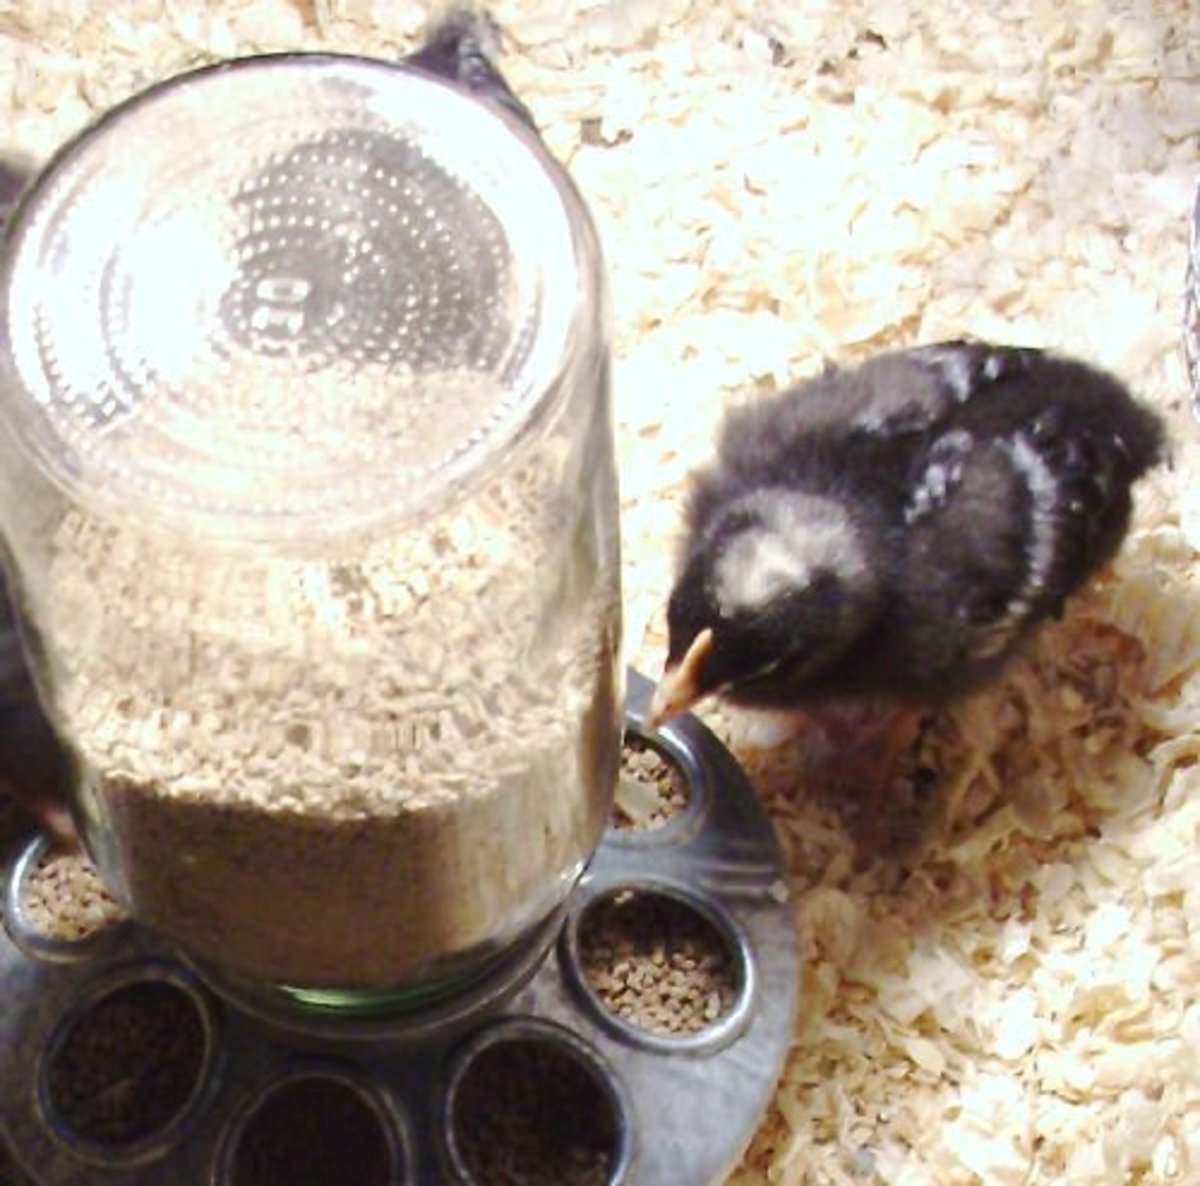 Eating from the feeder